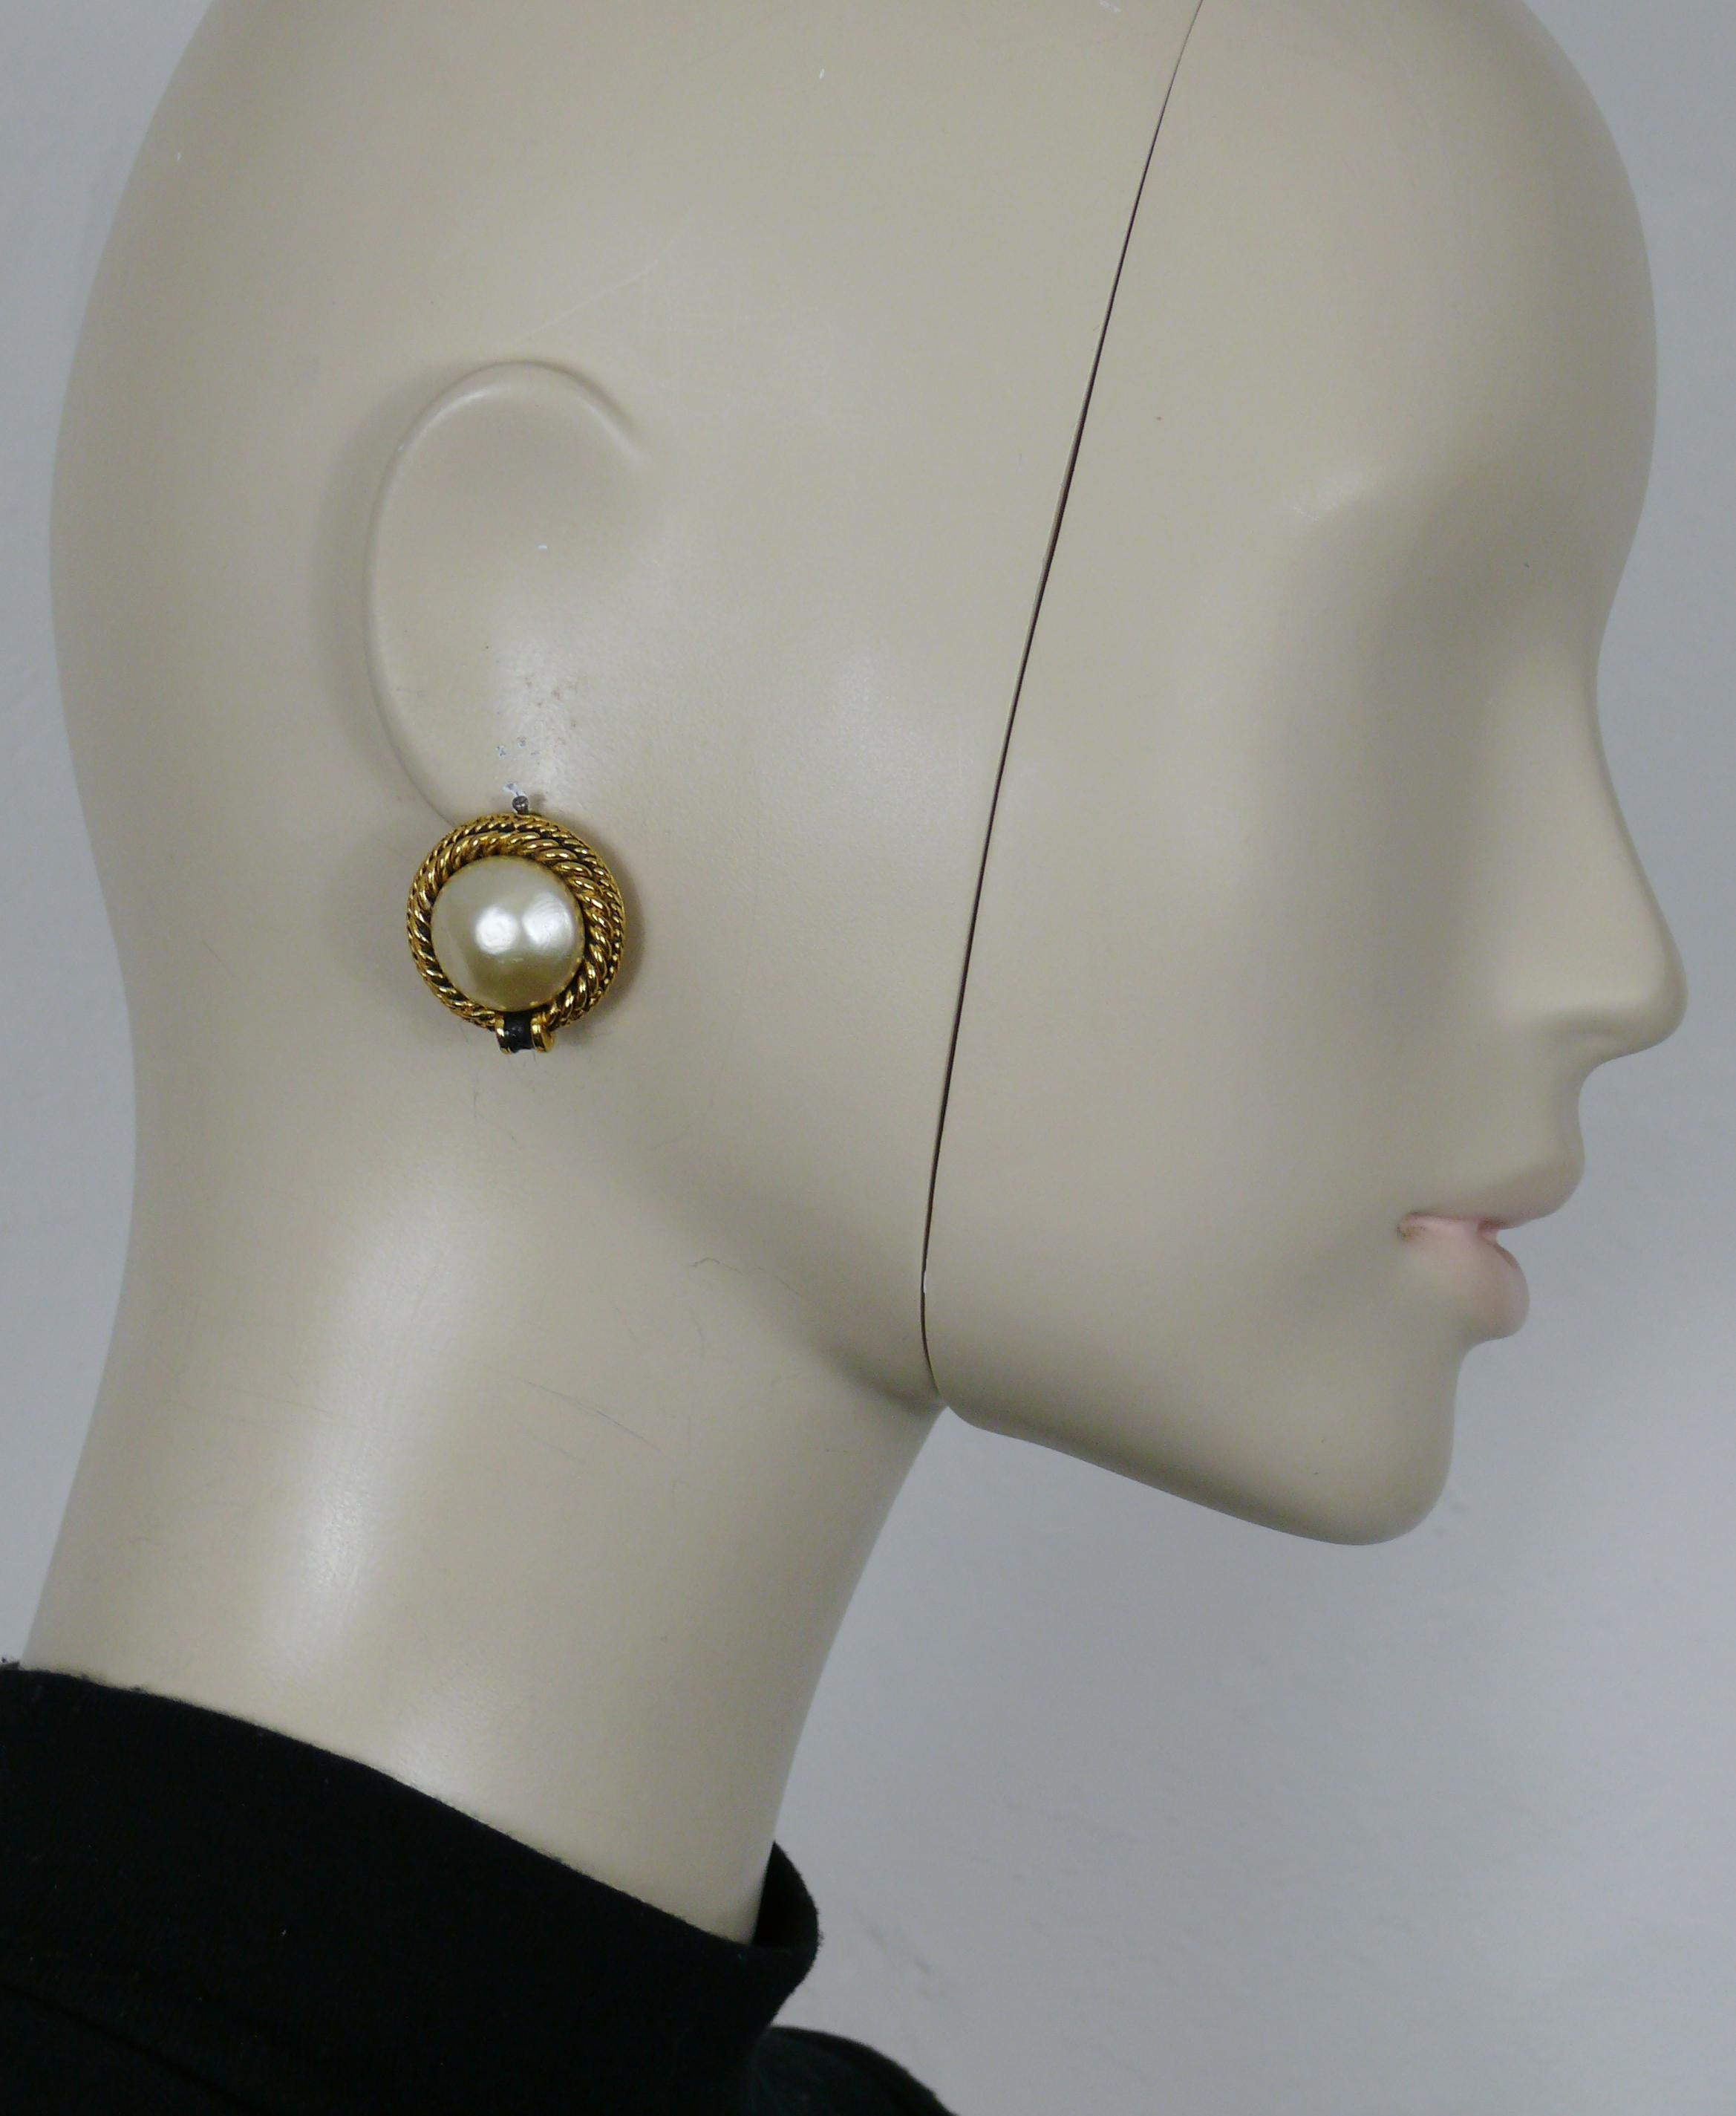 CHANEL vintage gold tone clip-on earrings with a faux pearl at the center.

Embossed CHANEL and 2161.

Indicative measurements : diameter approx. 2.4 cm (0.94 inch).

Weight per earring : approx. 12 grams.

Materials : Gold tone metal hardware /